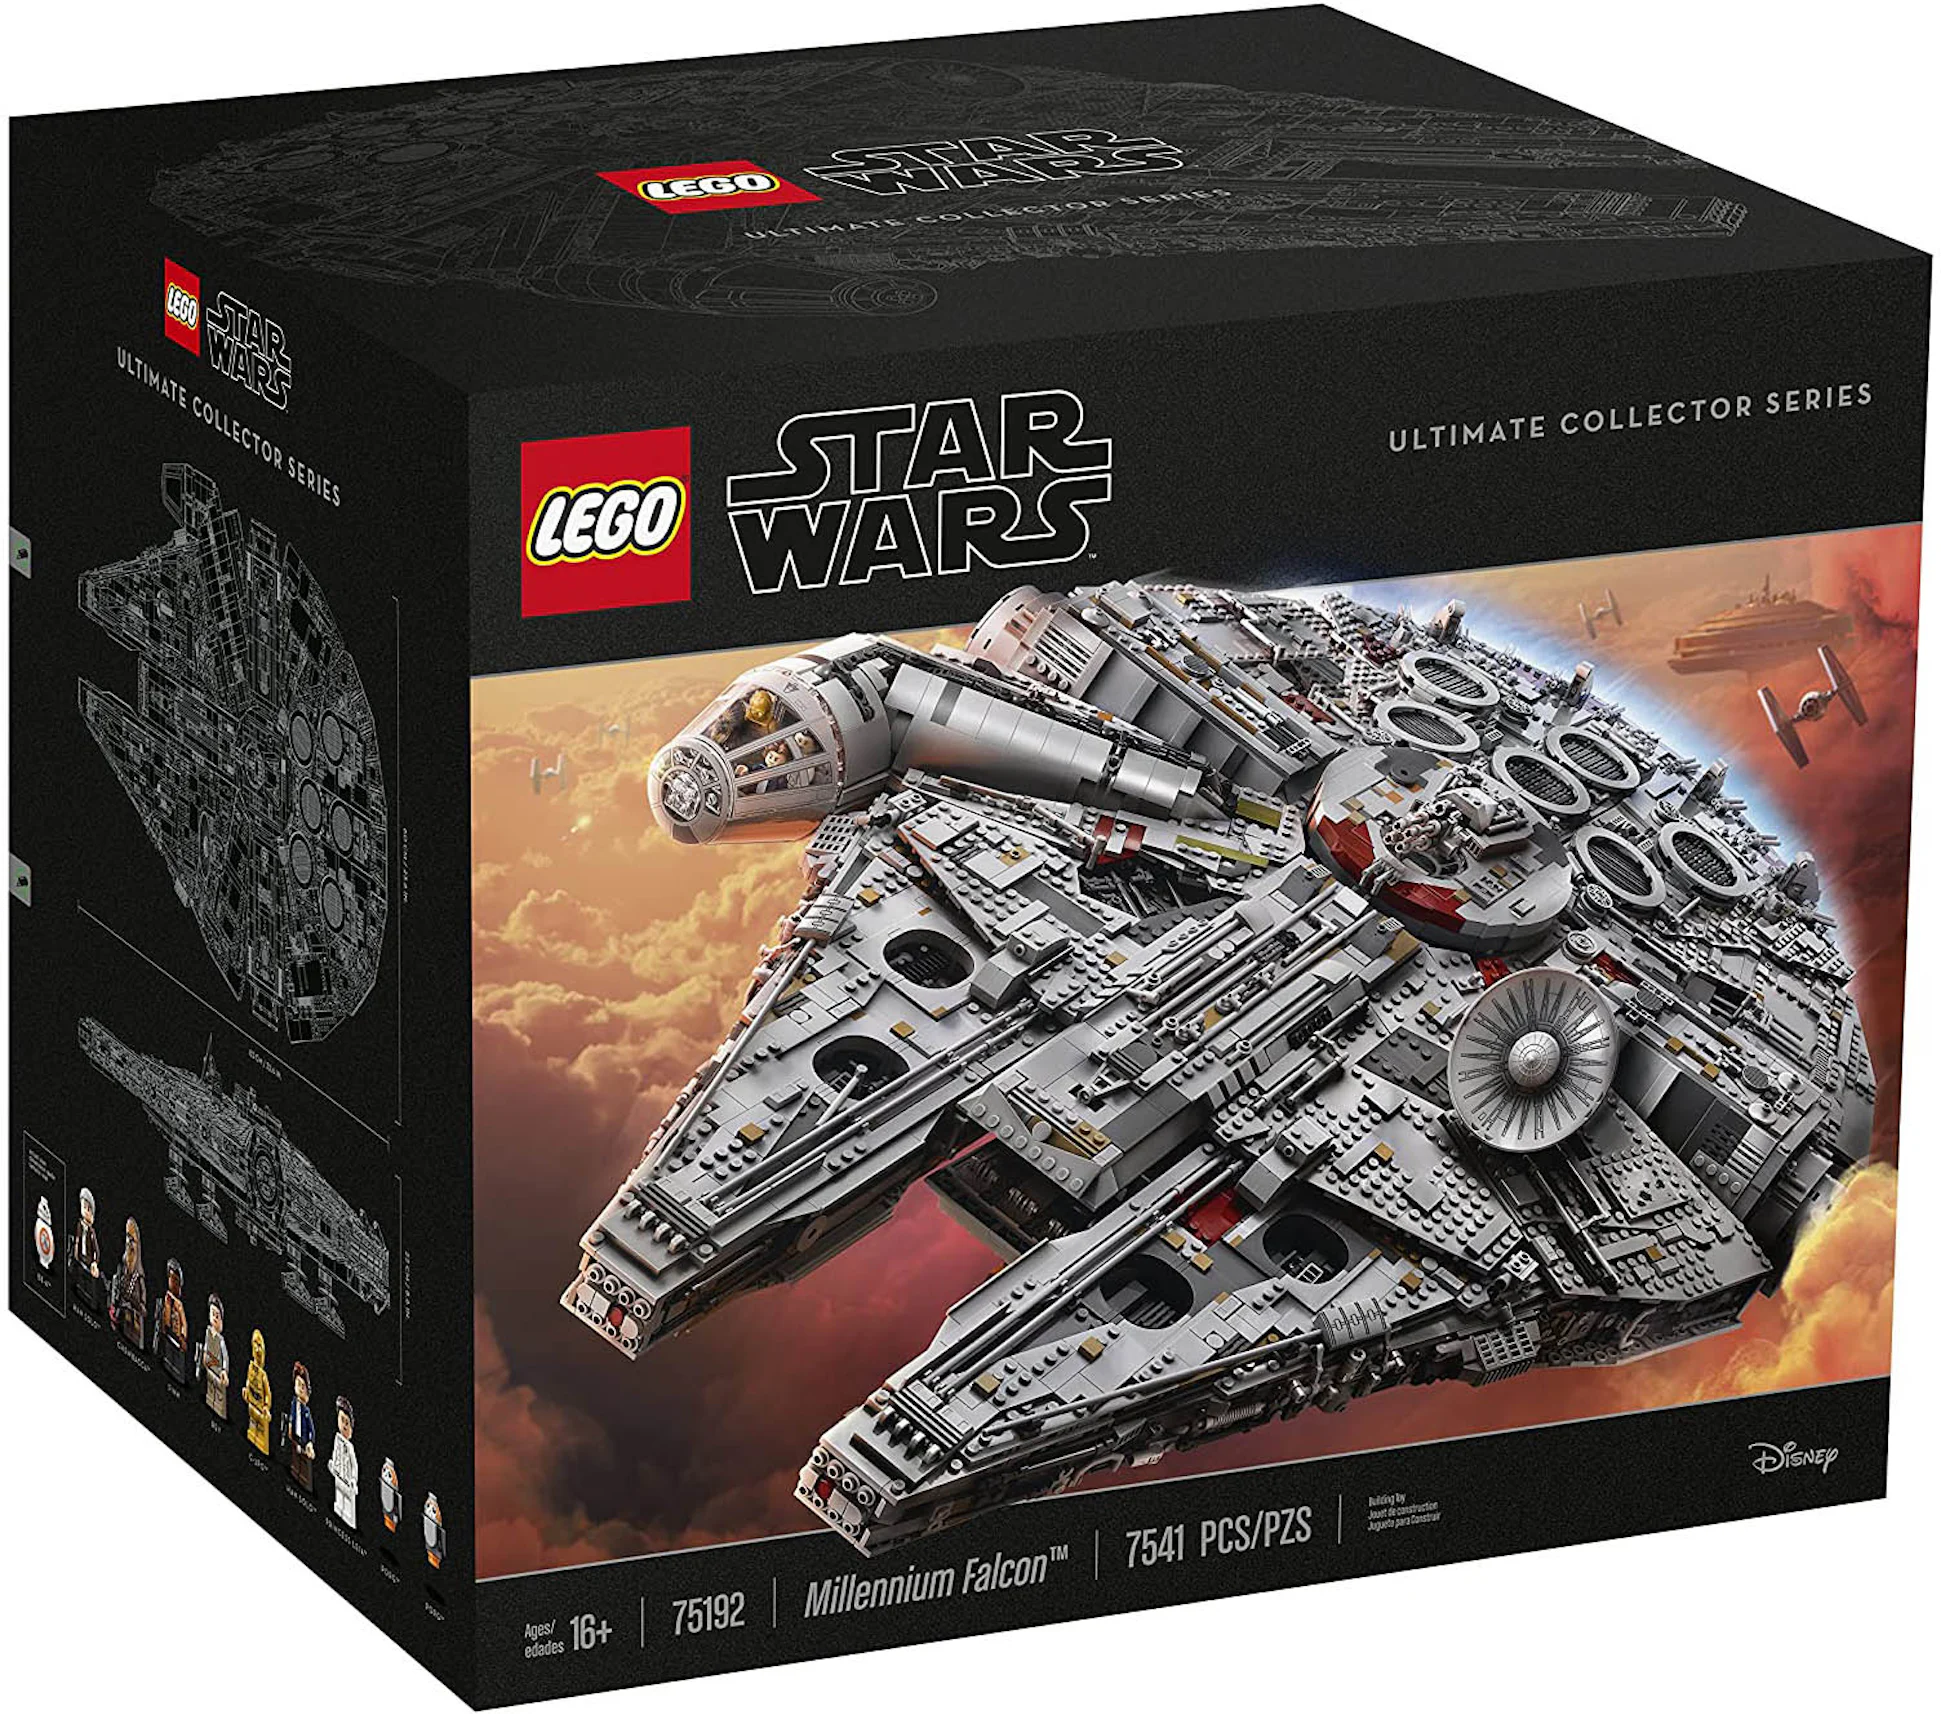 LEGO Star Wars Millennium Falcon Ultimate Collector Series Set 75192 - US